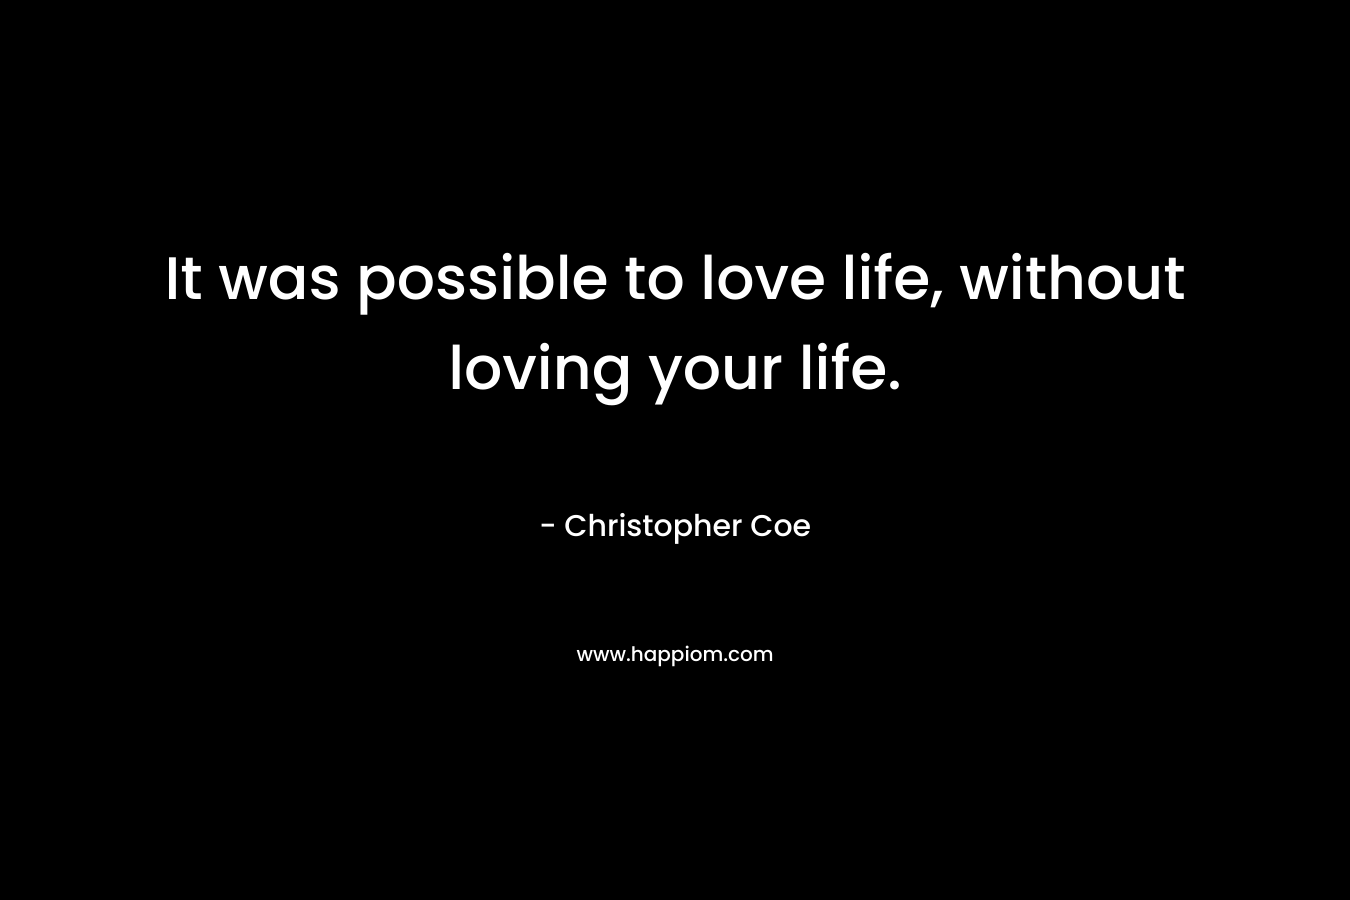 It was possible to love life, without loving your life.